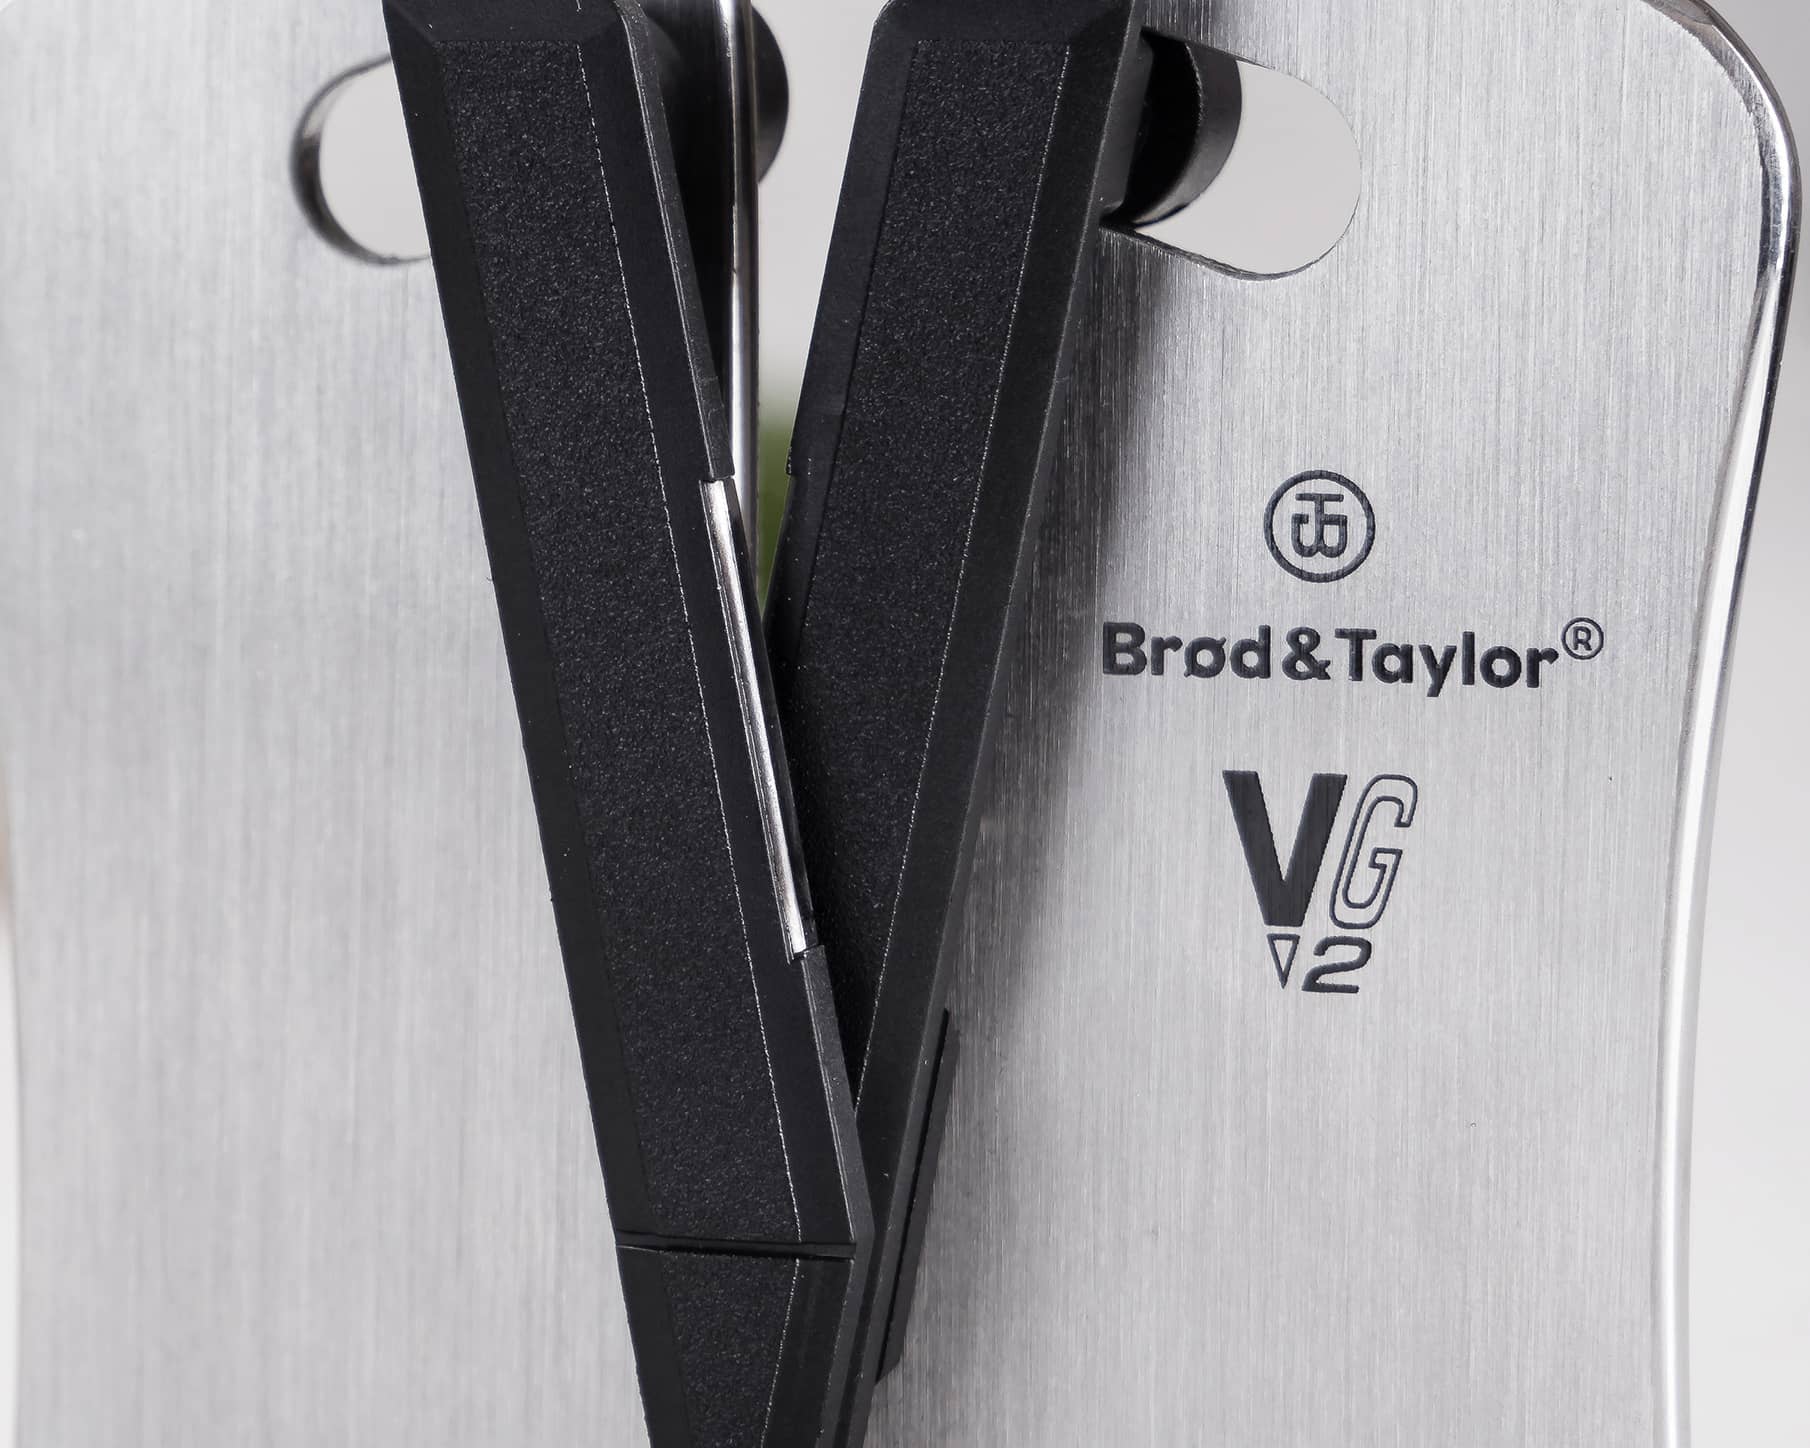 Brod & Taylor VG2 Professional, New Proprietary Tungsten Carbide Sharpeners